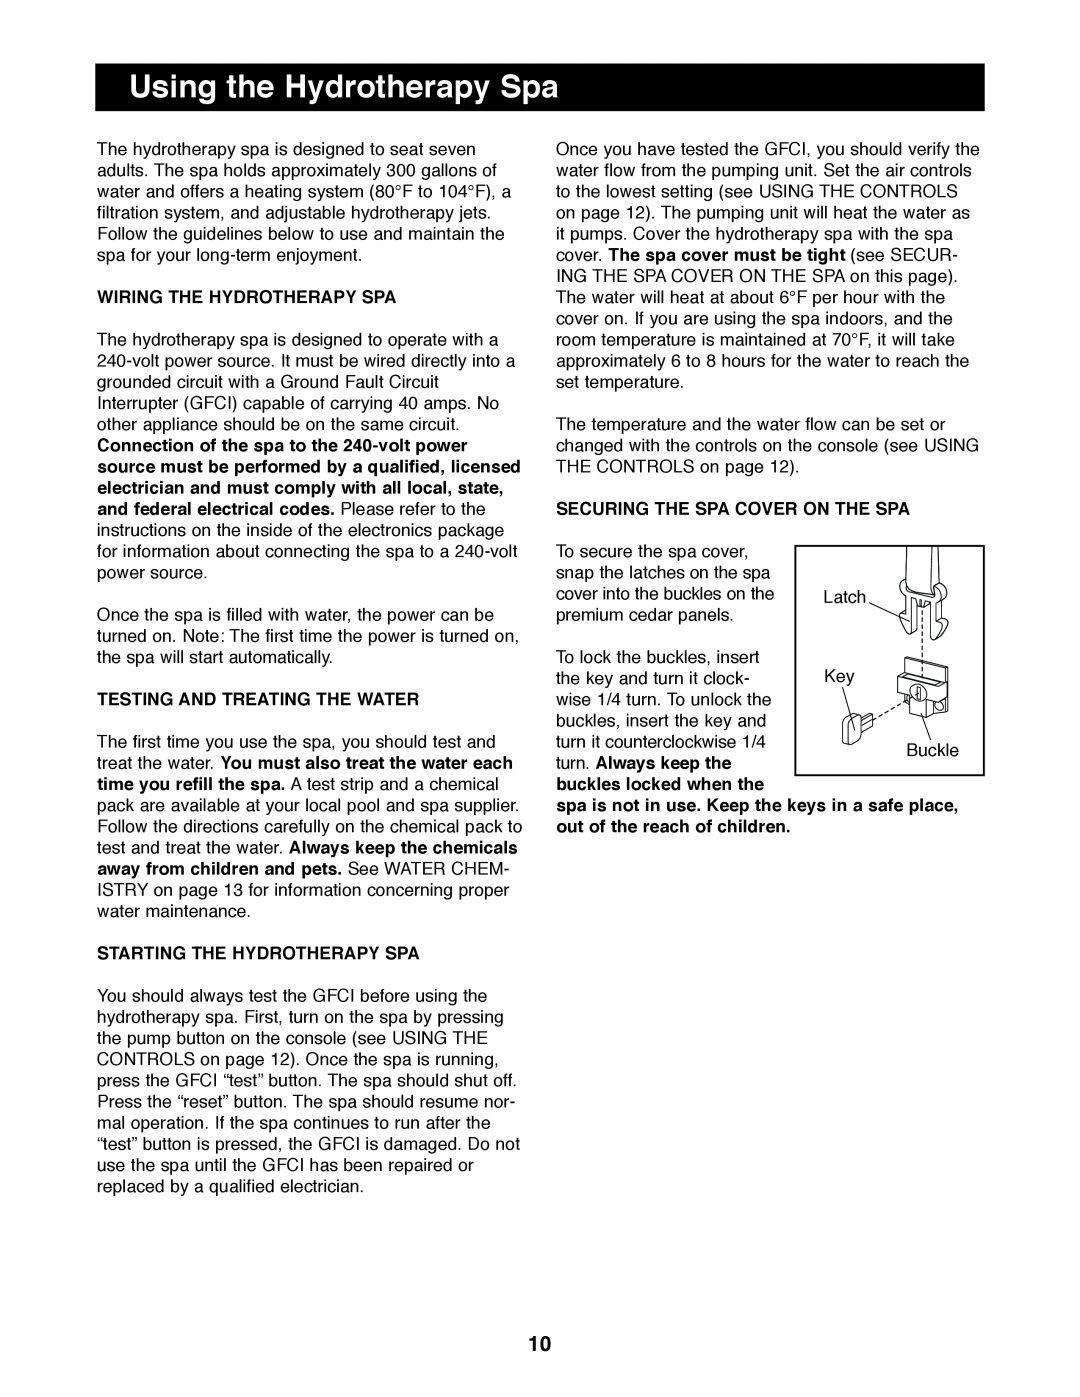 Image IMSW73910 user manual Using the Hydrotherapy Spa, Wiring The Hydrotherapy Spa, Testing And Treating The Water 